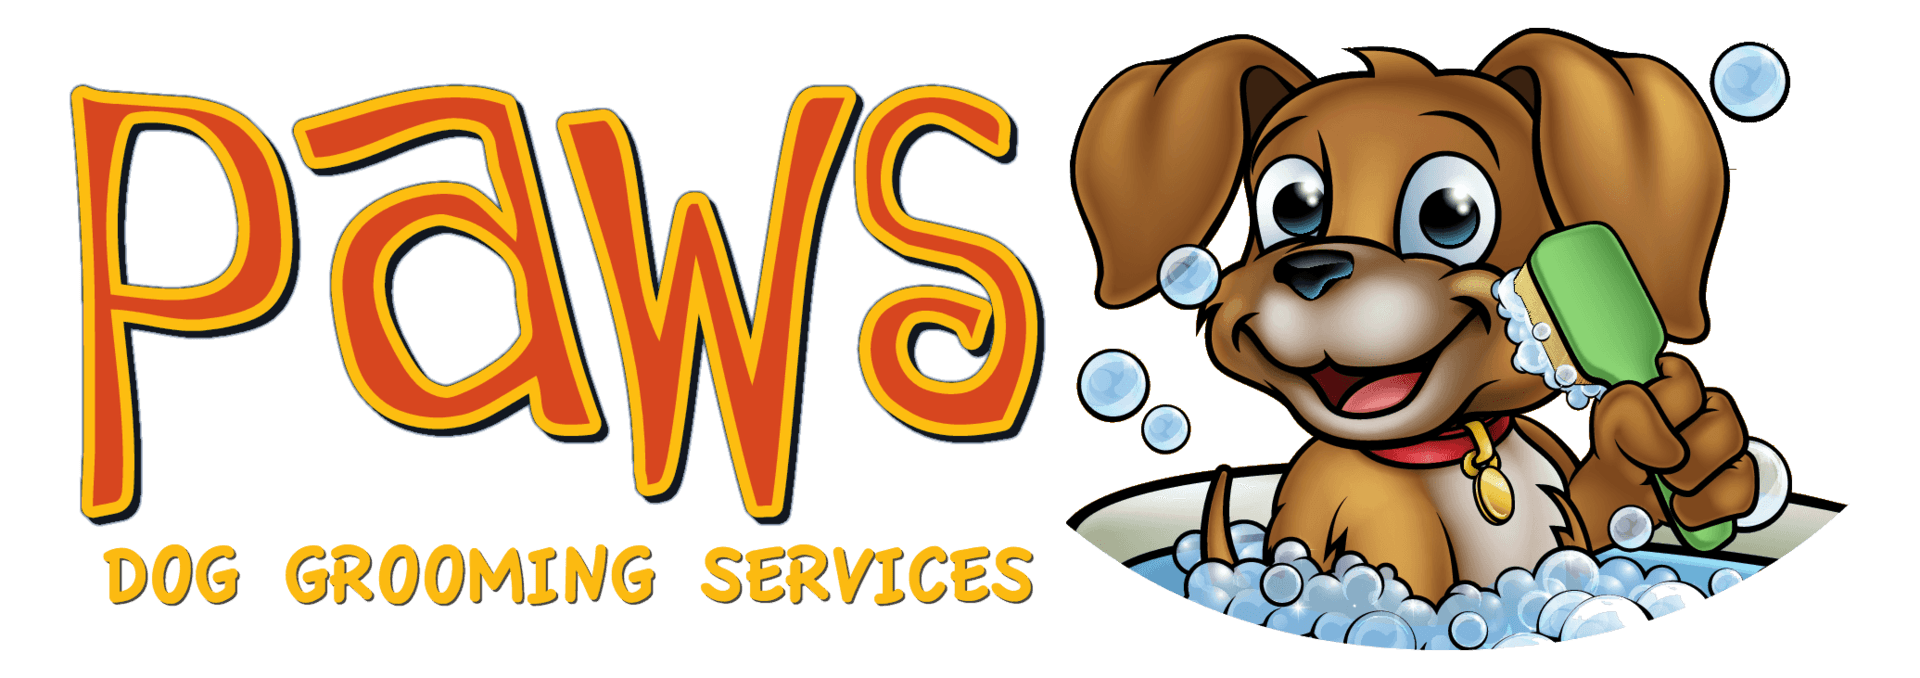 Paws Dog Grooming Services Rotherham